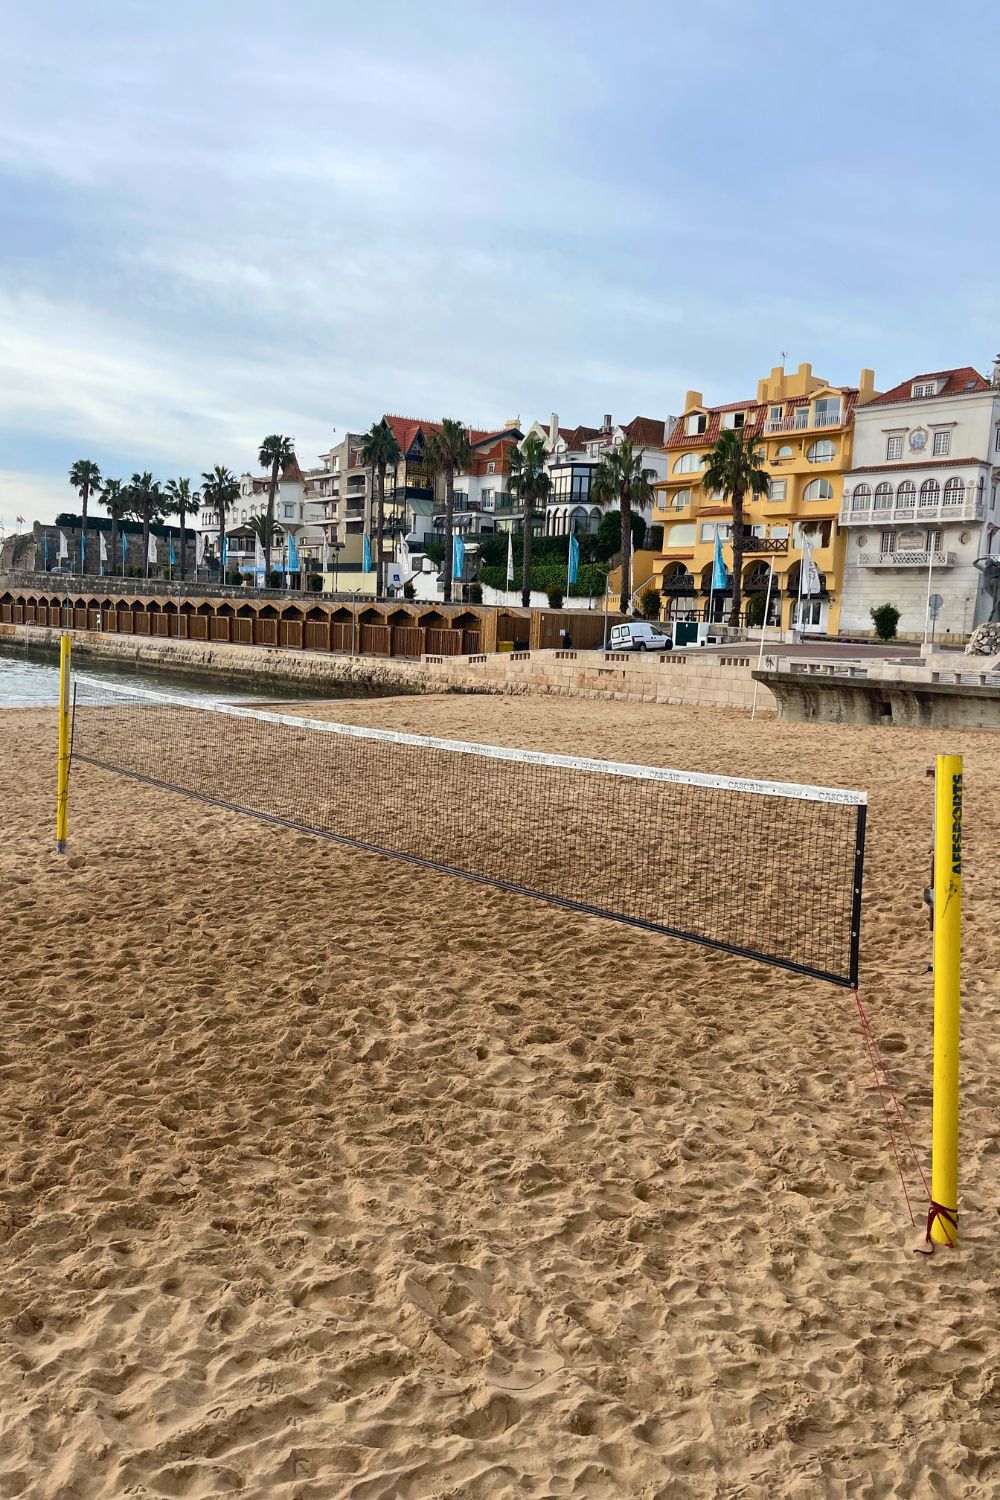 A sandy beach volleyball court awaits players in Cascais, with a net set against a picturesque backdrop of elegant houses and palm trees lining the promenade, under an overcast sky.